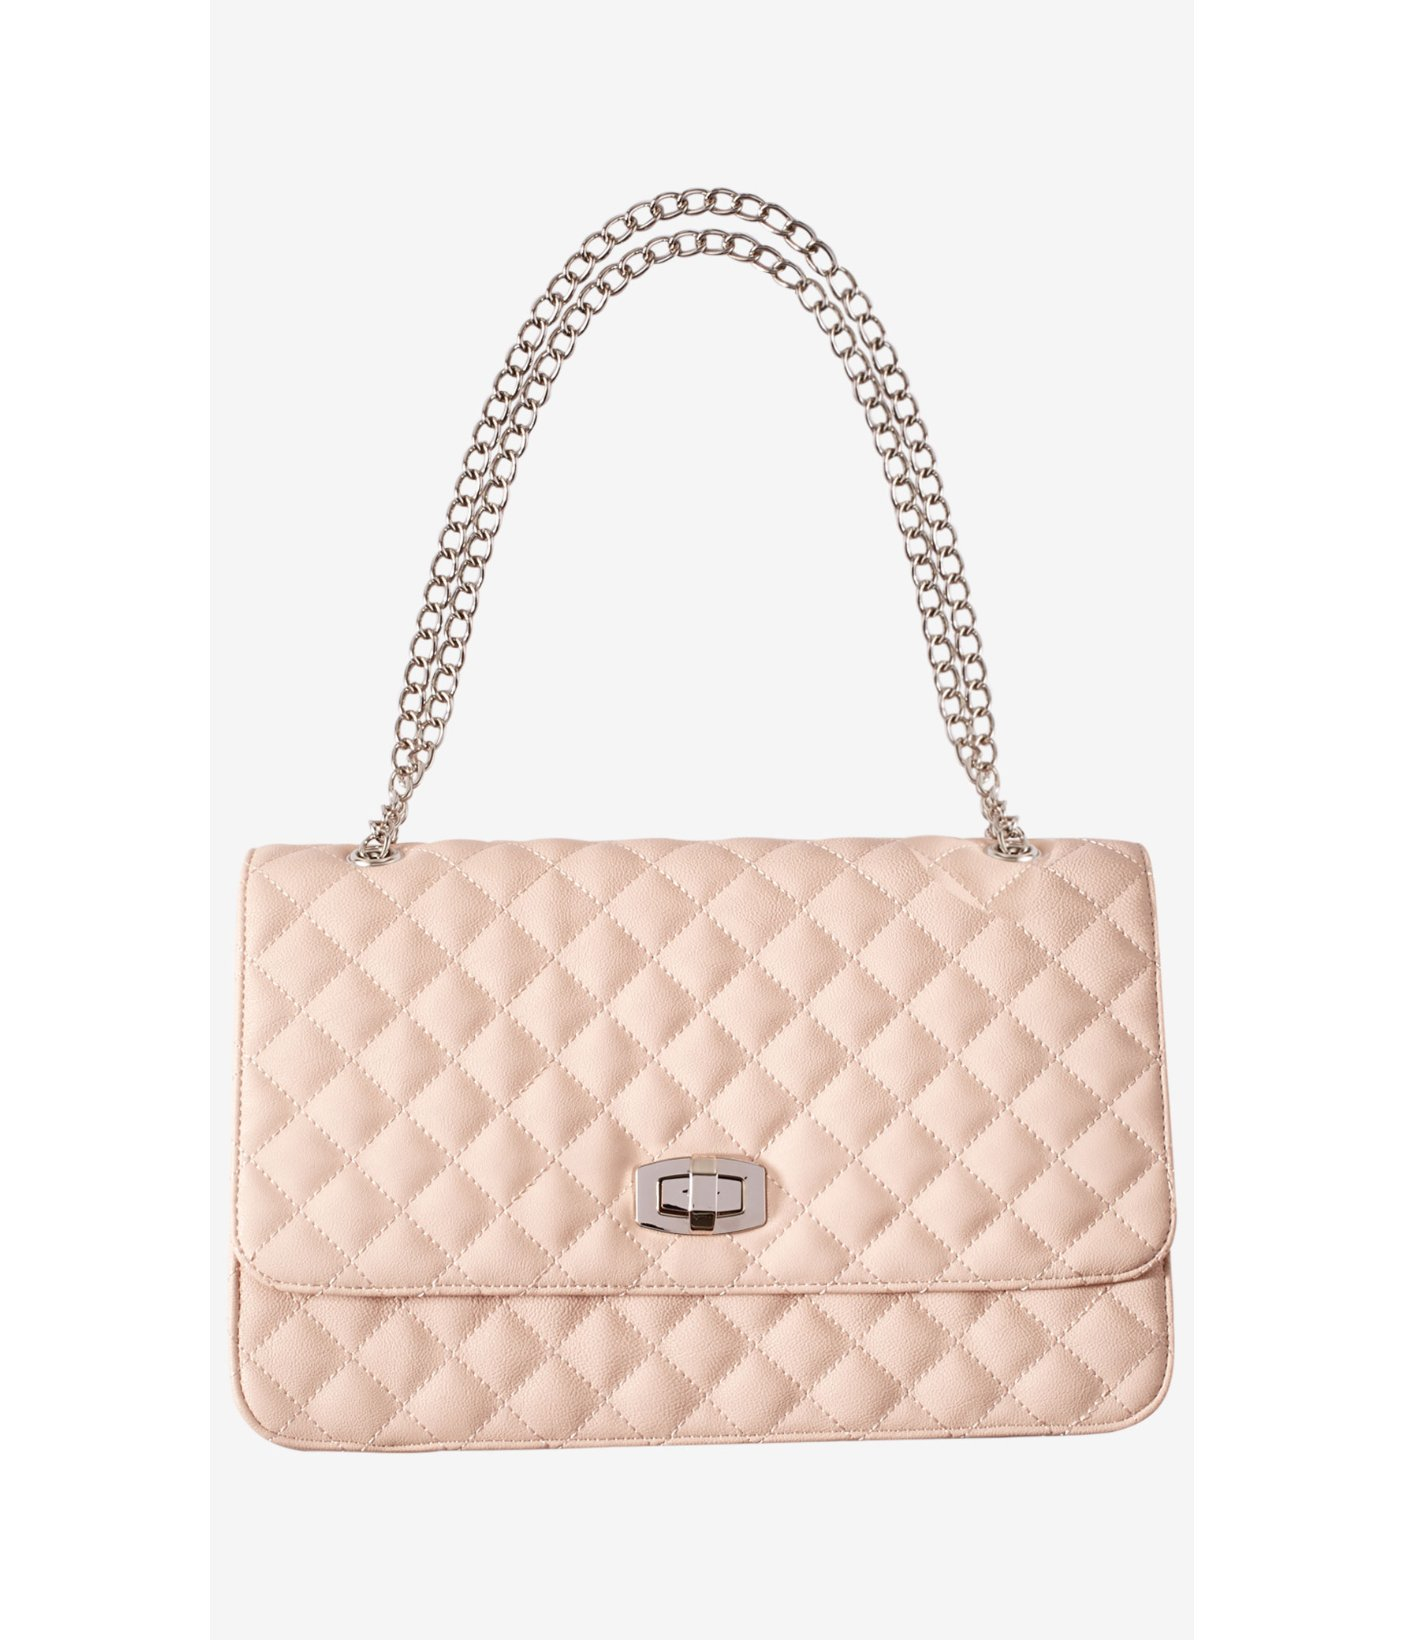 Lyst - Express Large Quilted Chain Strap Shoulder Bag in Natural